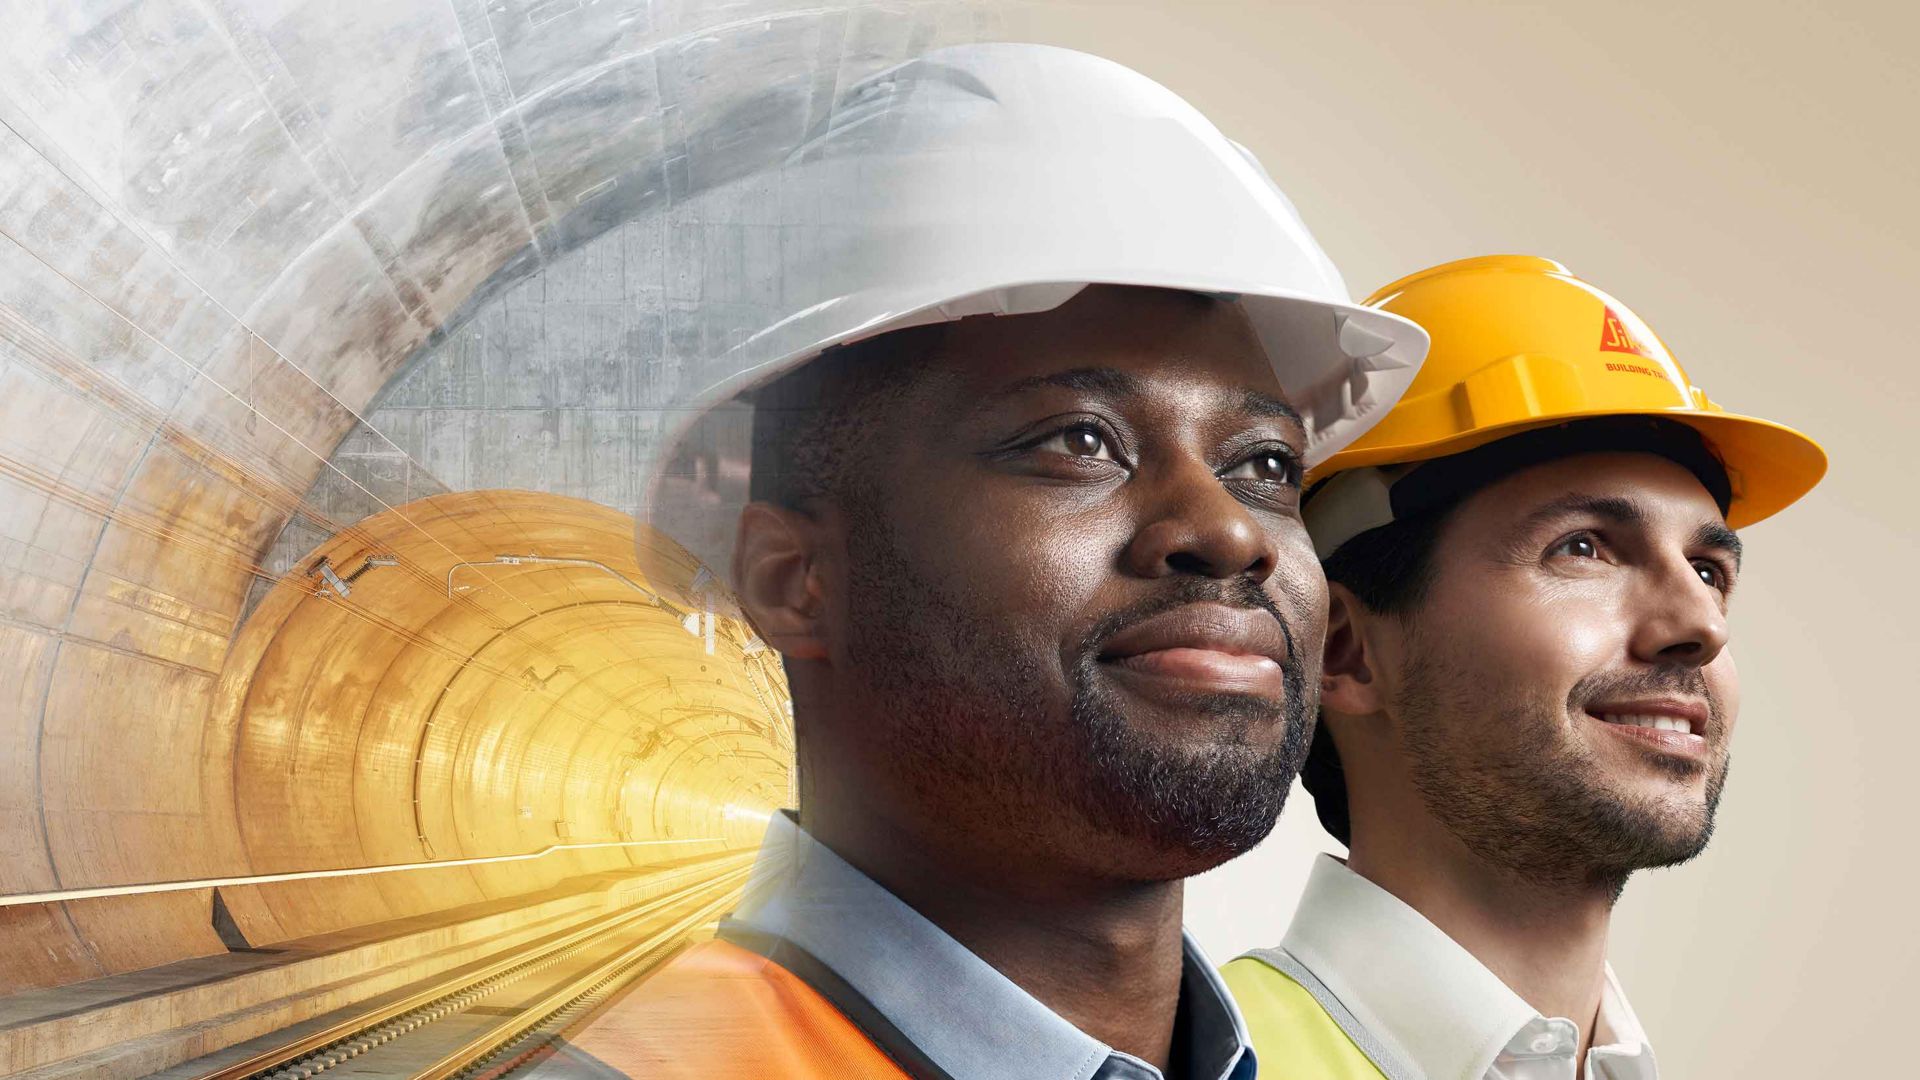 2 men faces worker engineer with Sika hardhat in tunnel Beyond the Expected image campaign